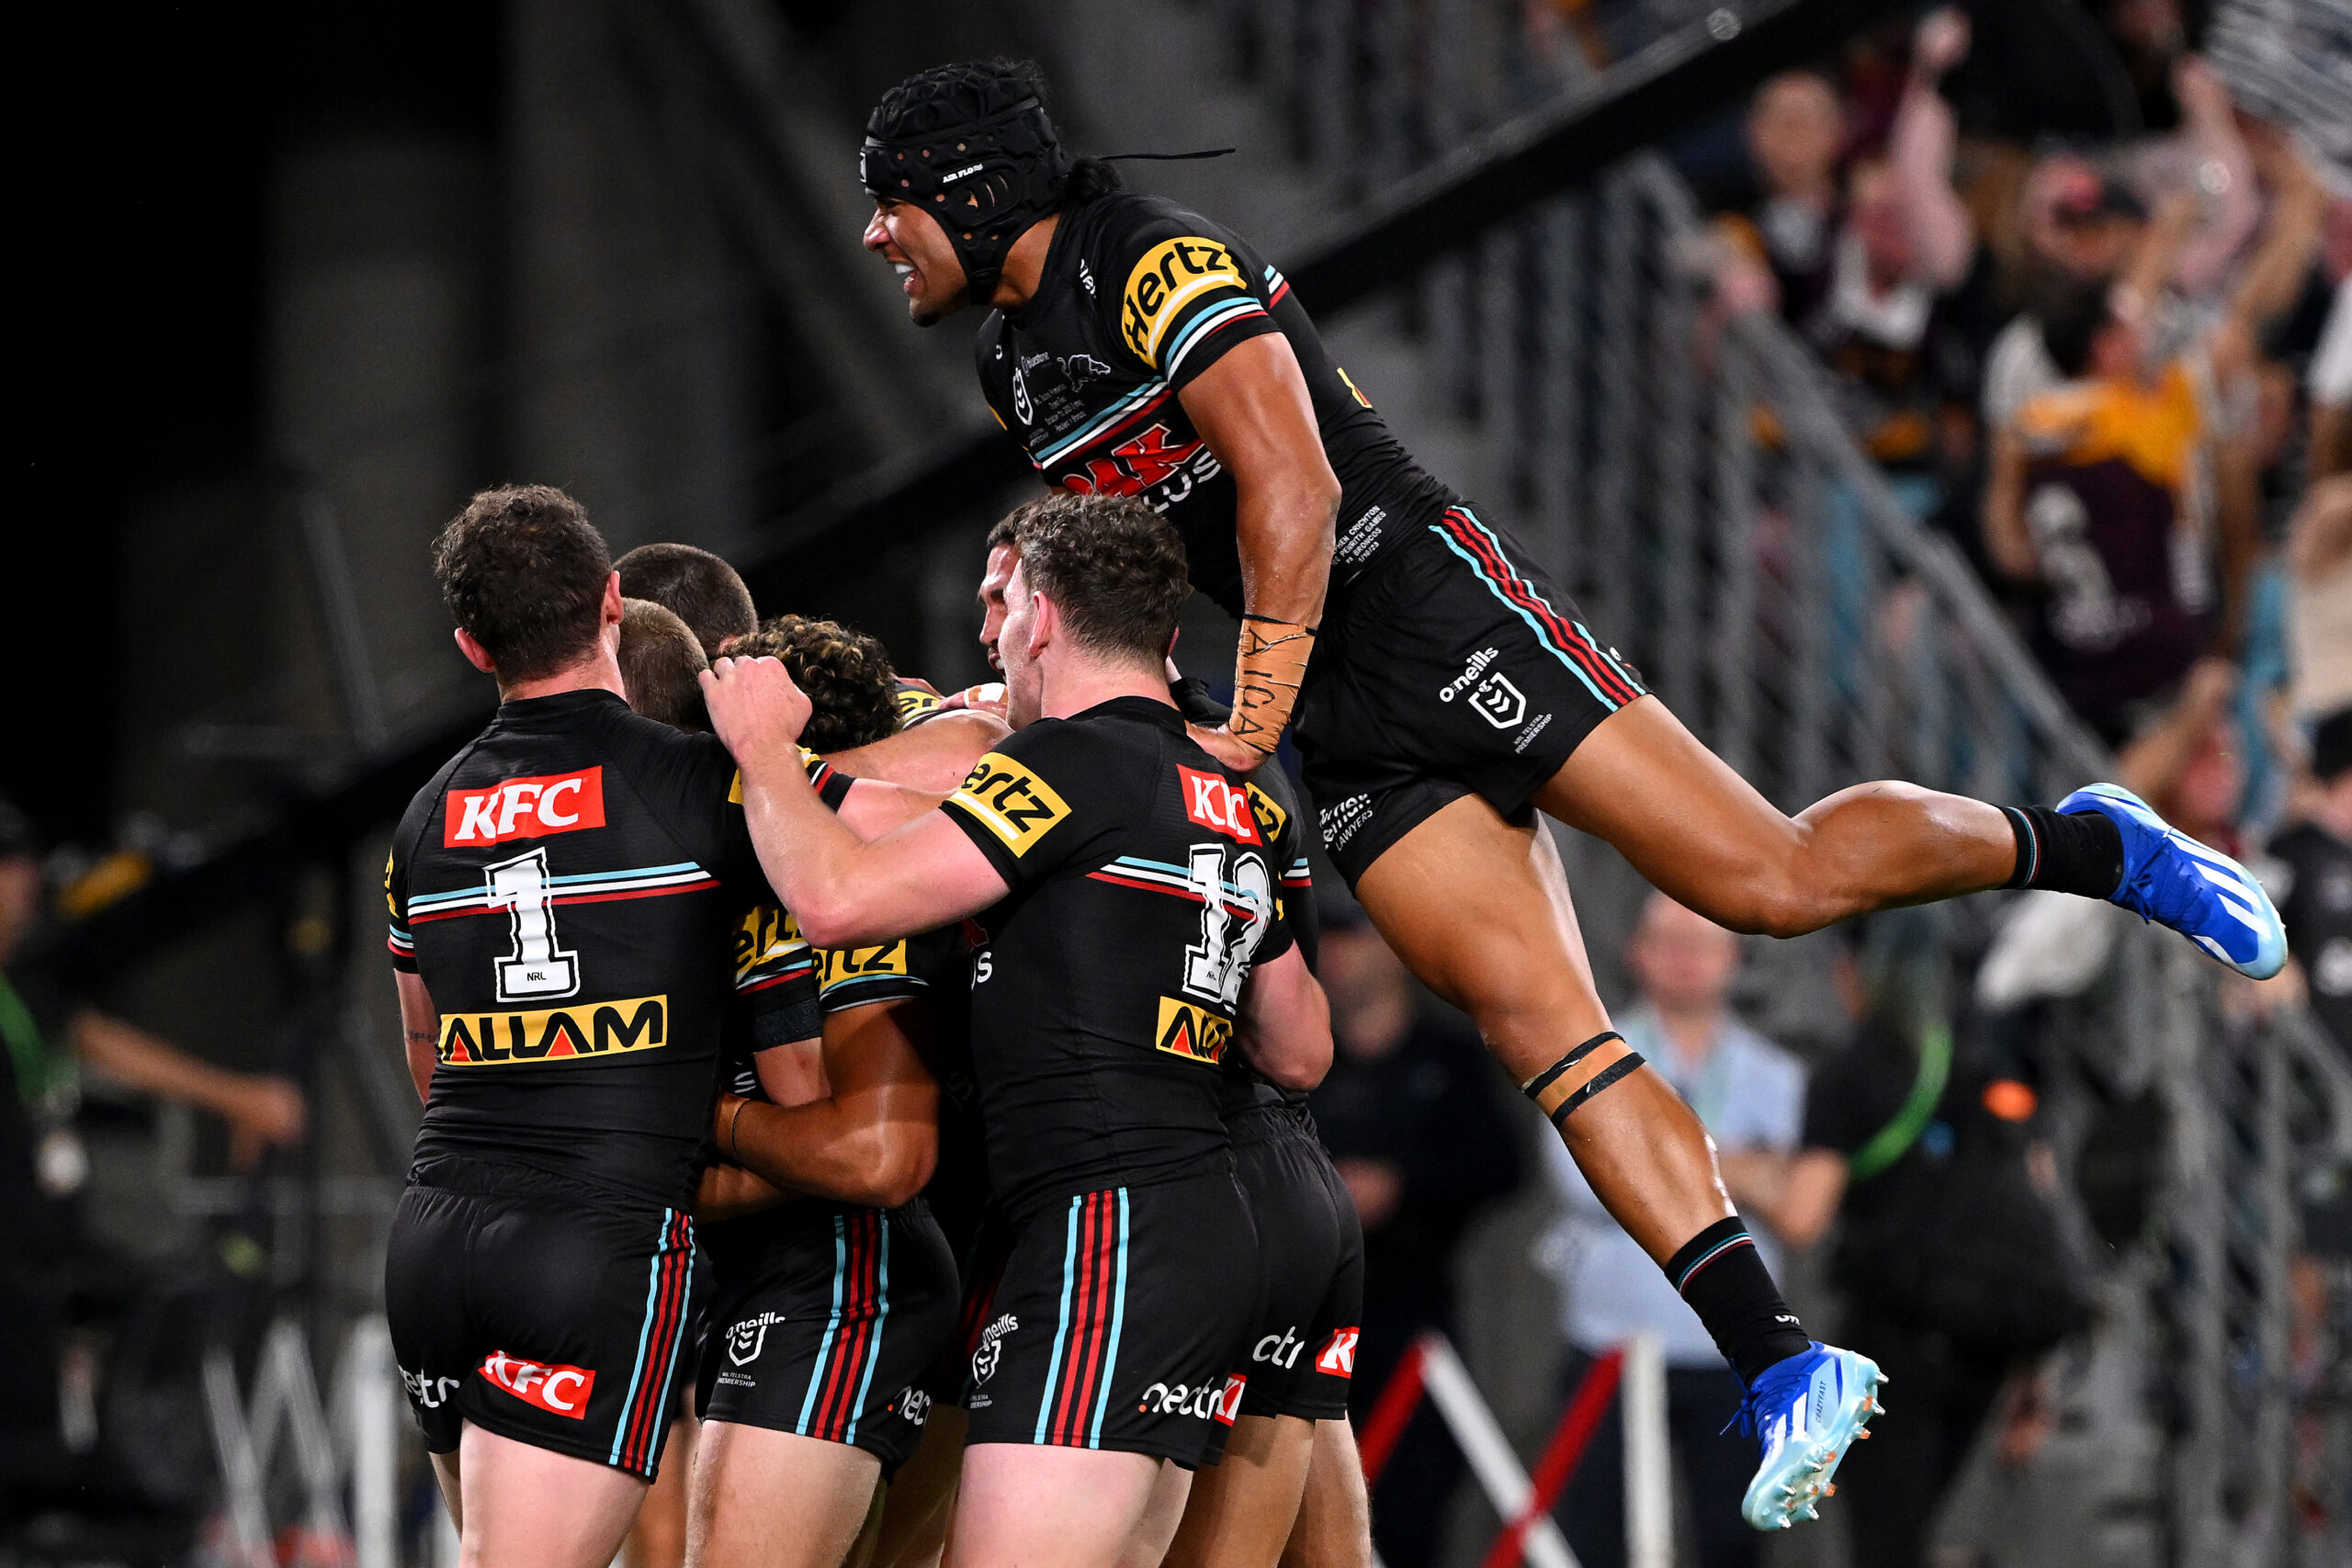 Penrith Panthers Vs Parramatta Eels Preview Nrl Round 2 Live Stream Teams Start Time Betting 4326